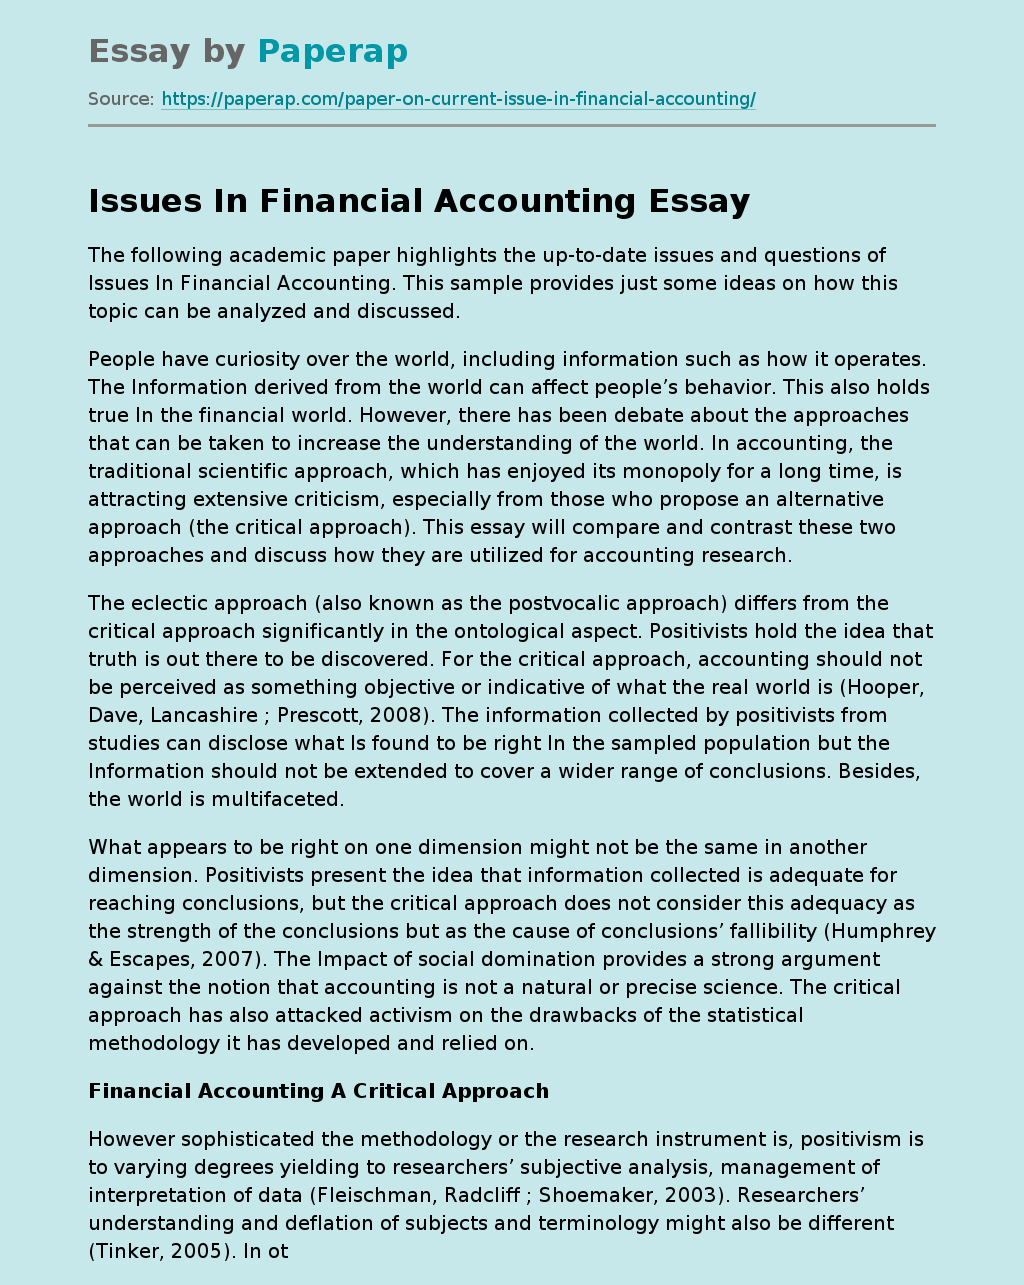 Issues In Financial Accounting